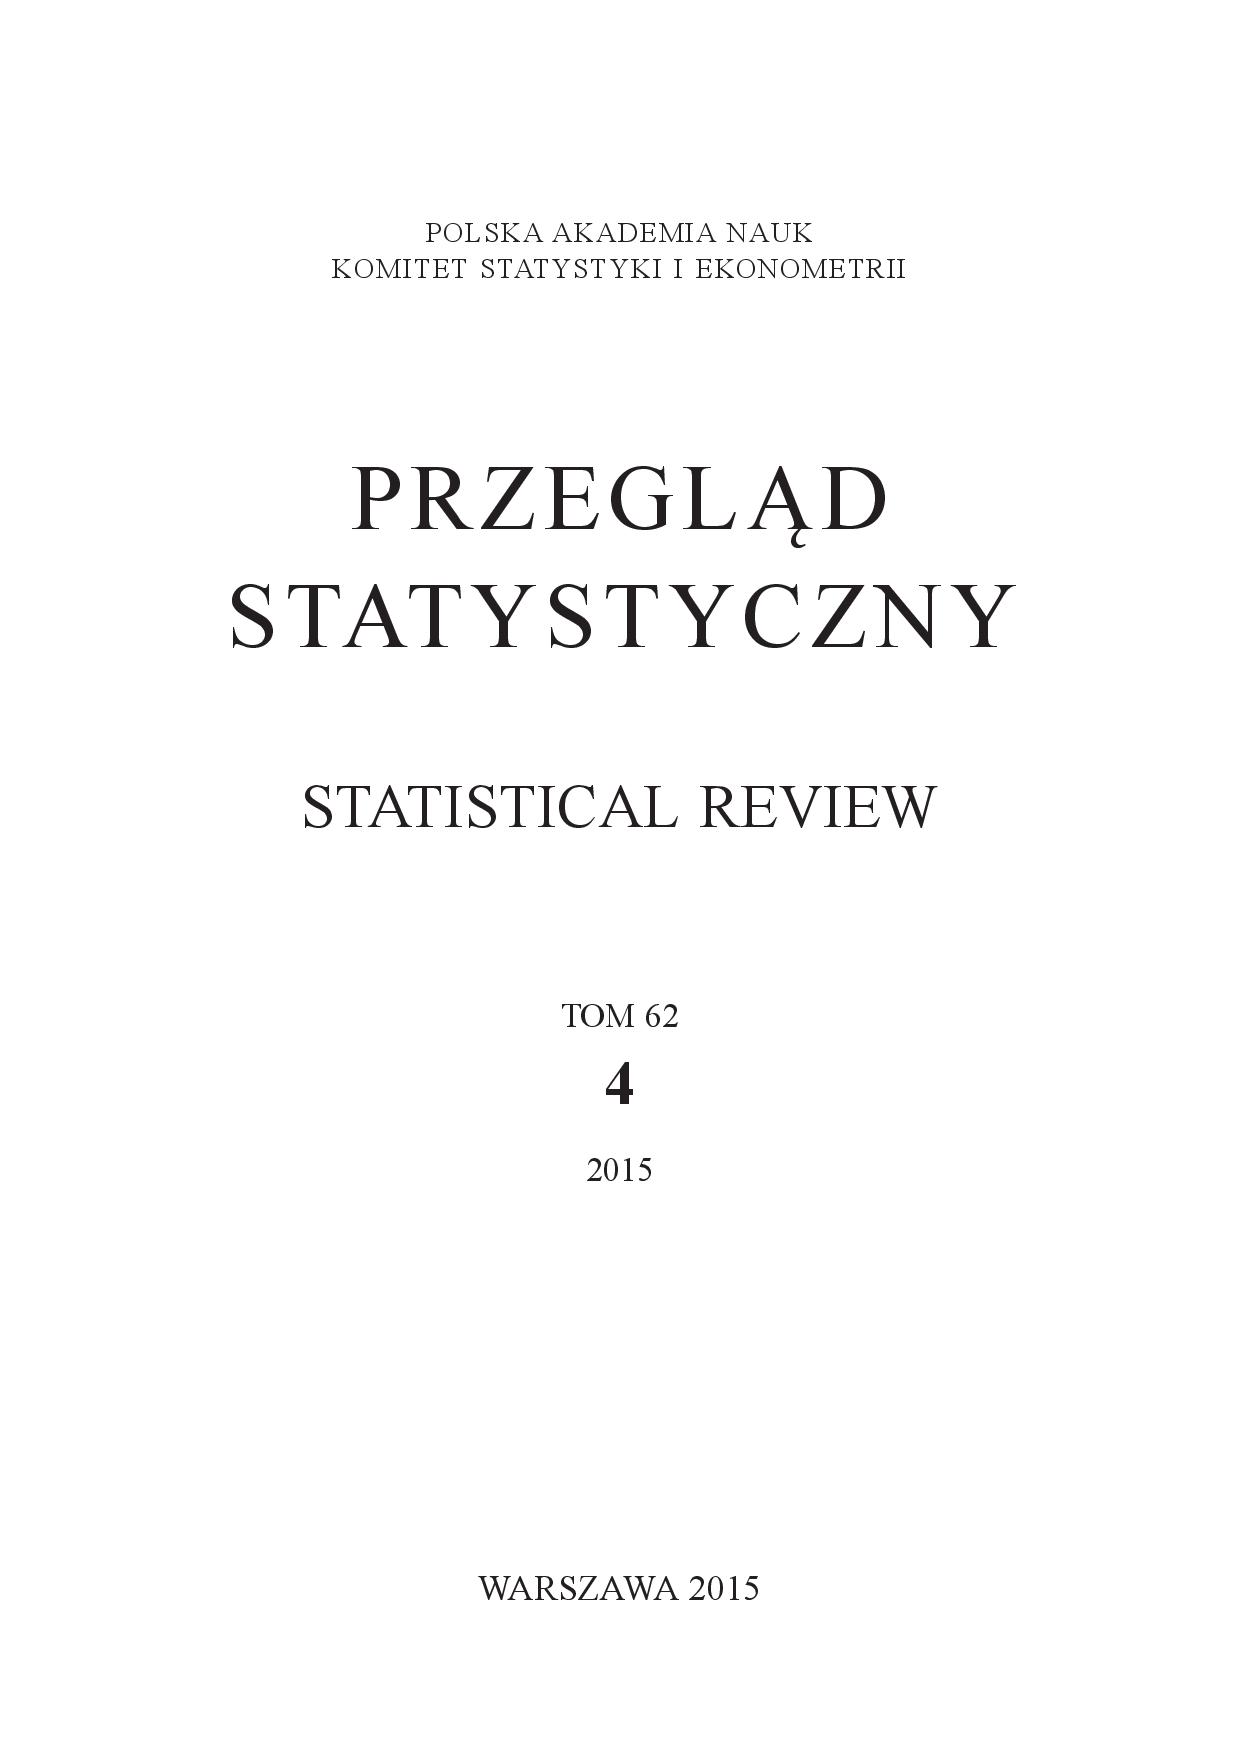 Multivariate Statistical Analysis of the FDI Motivations of Polish Companies Cover Image